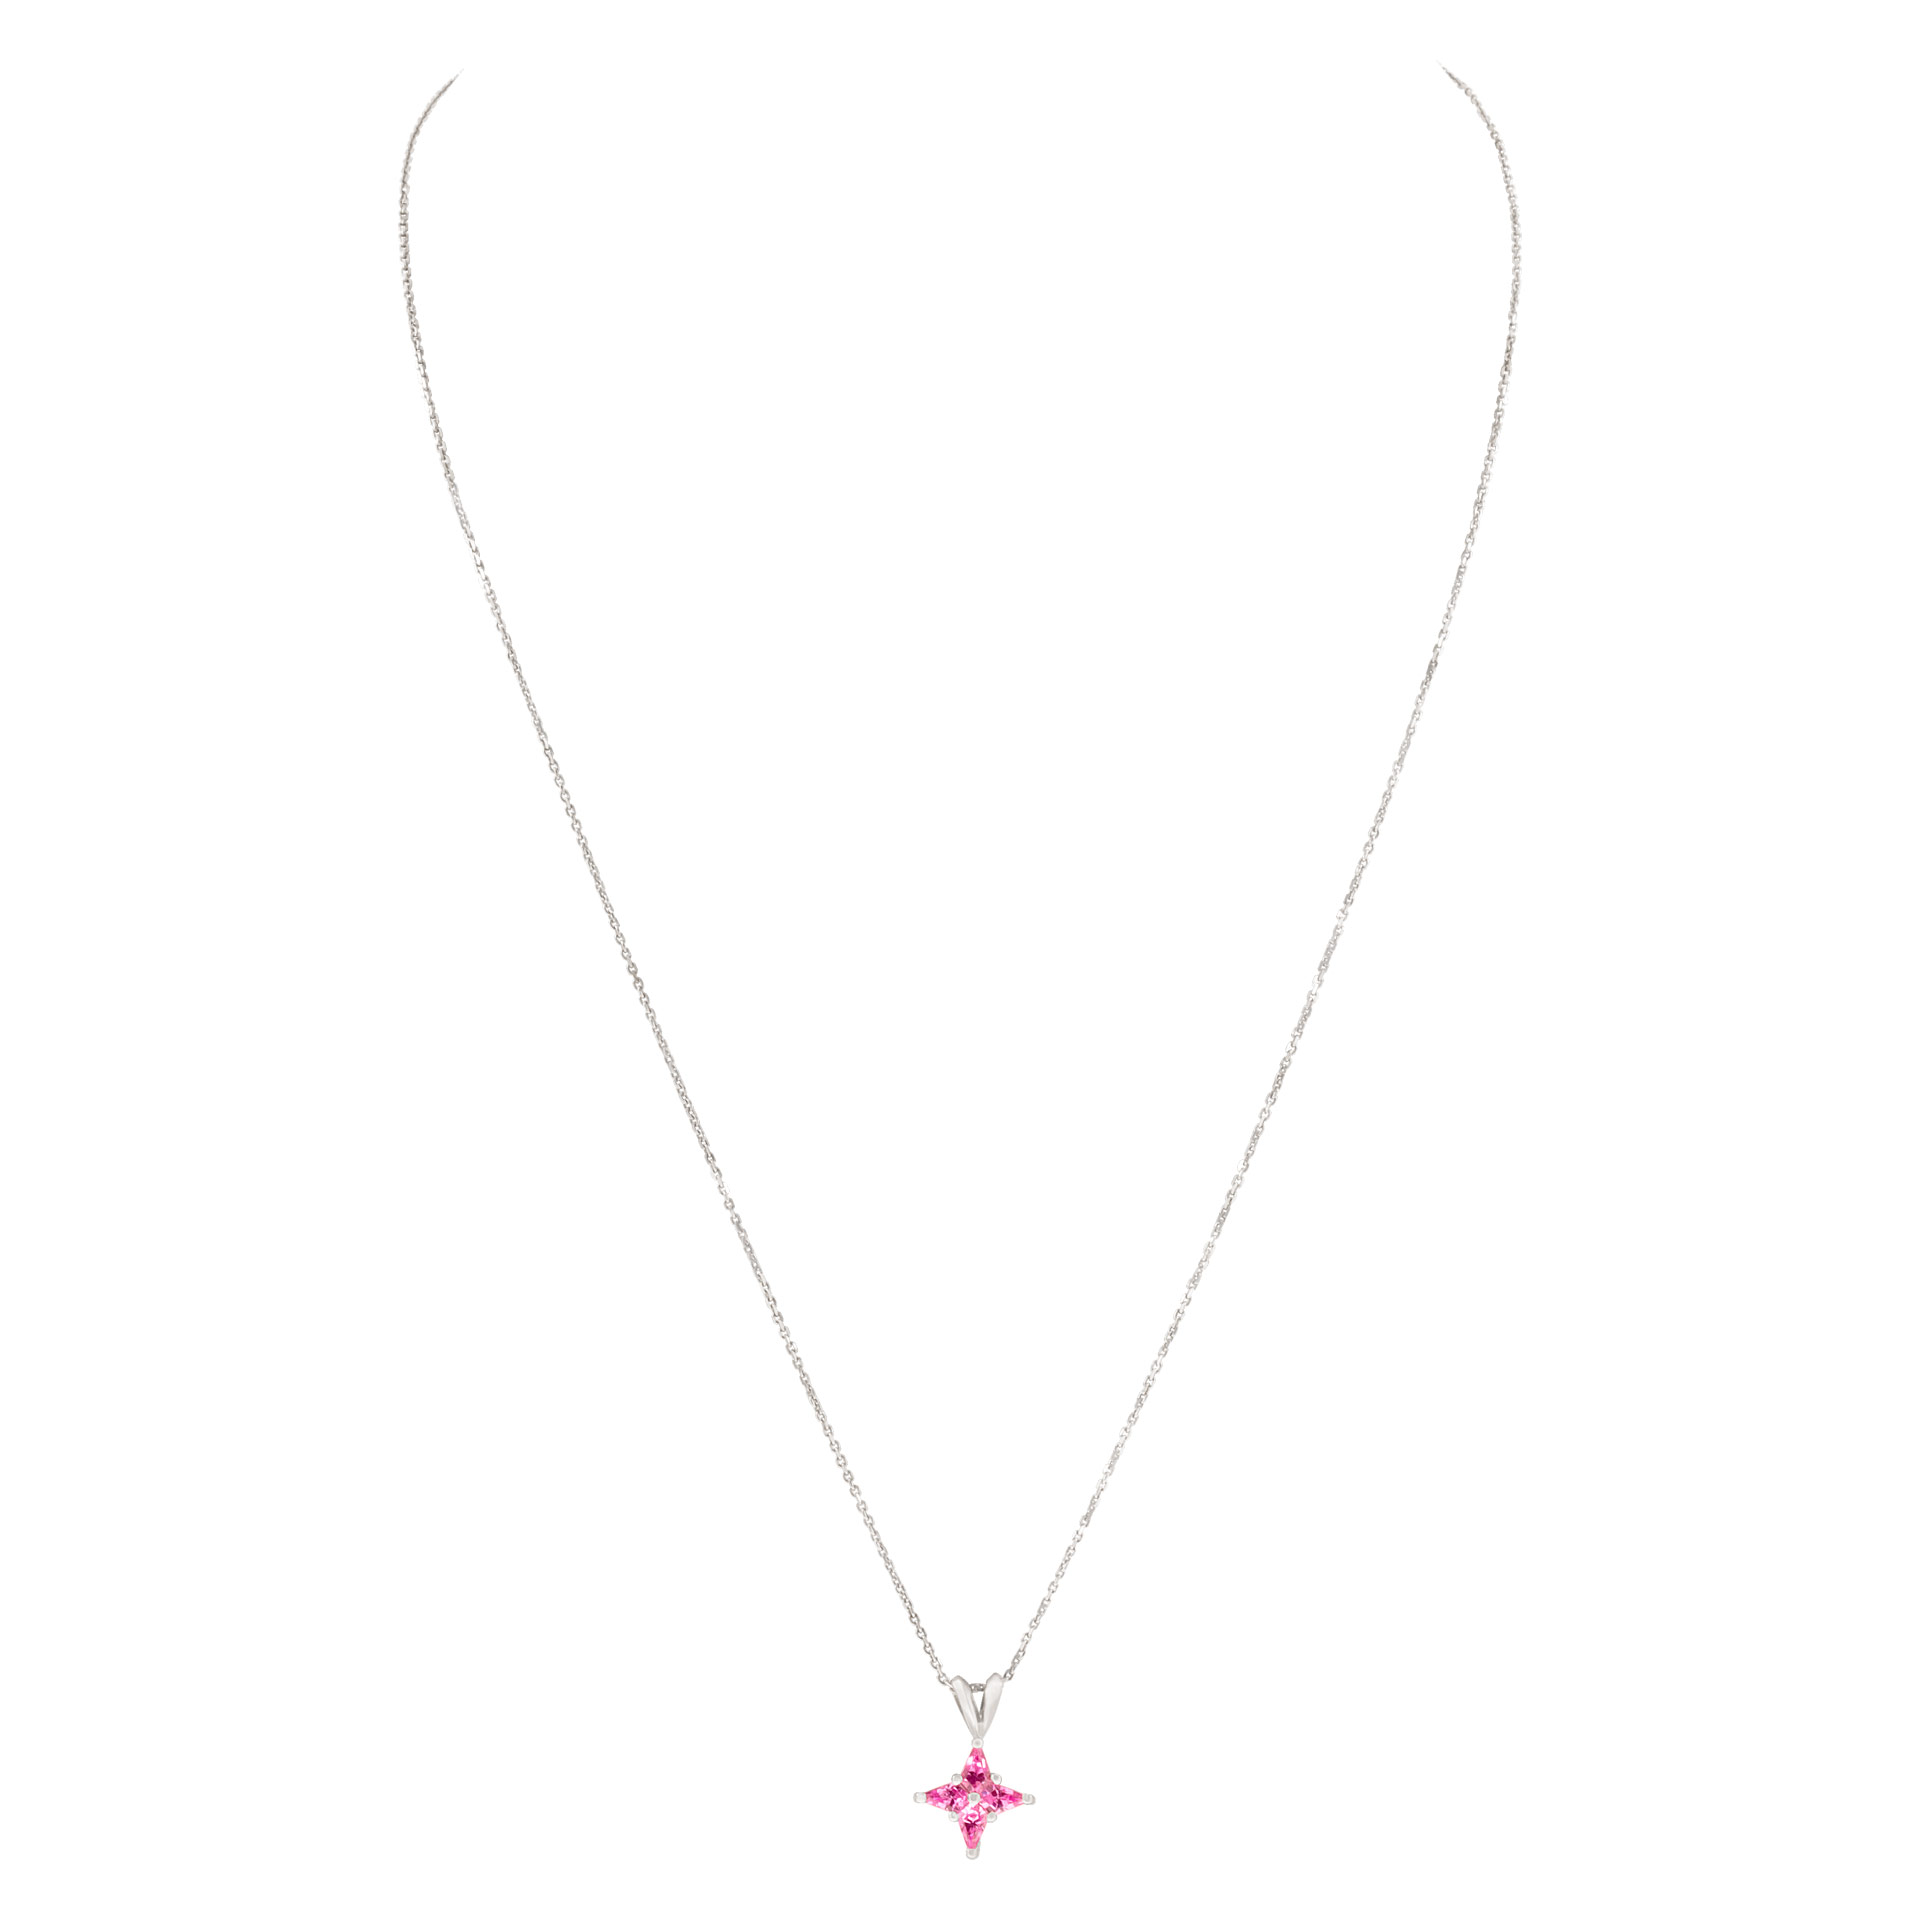 Pink star/flower necklace in 18k white gold with chain image 2